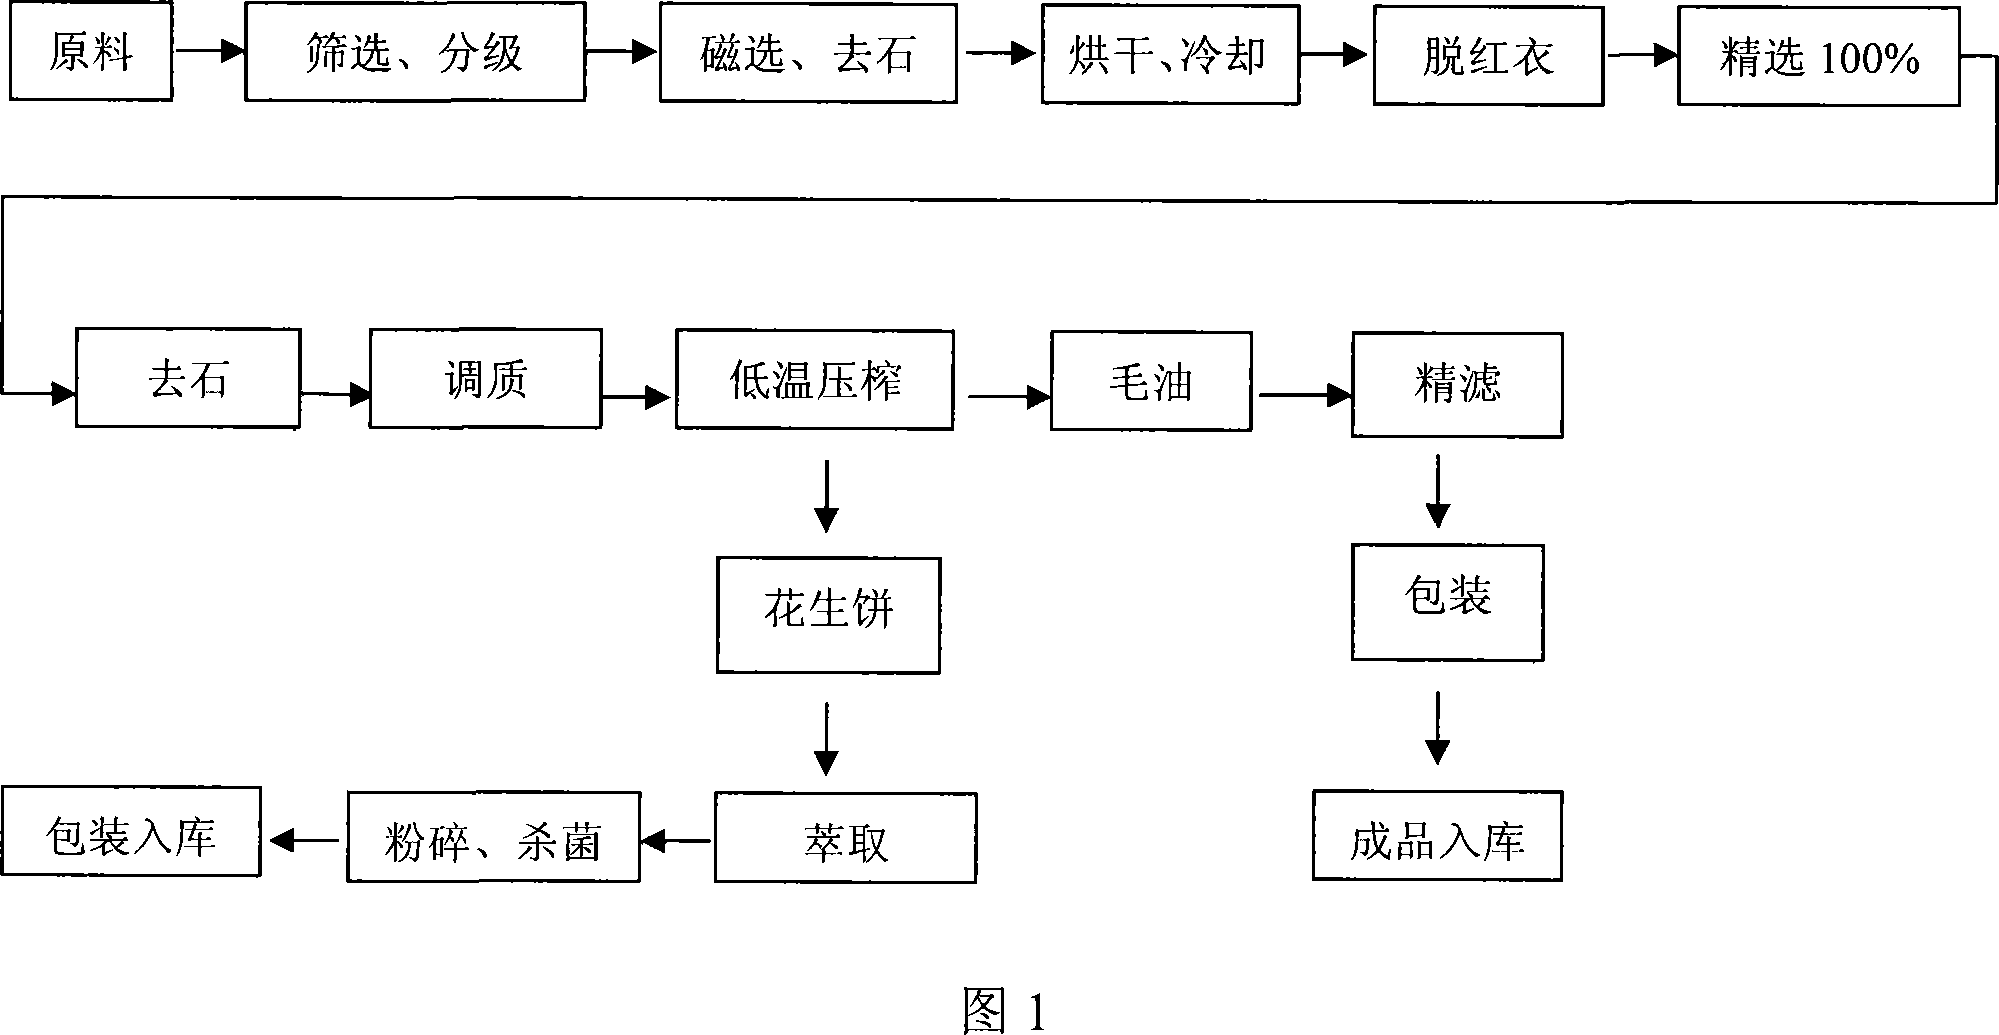 Process for preparing peanut oil and peanut protein powder synchronously